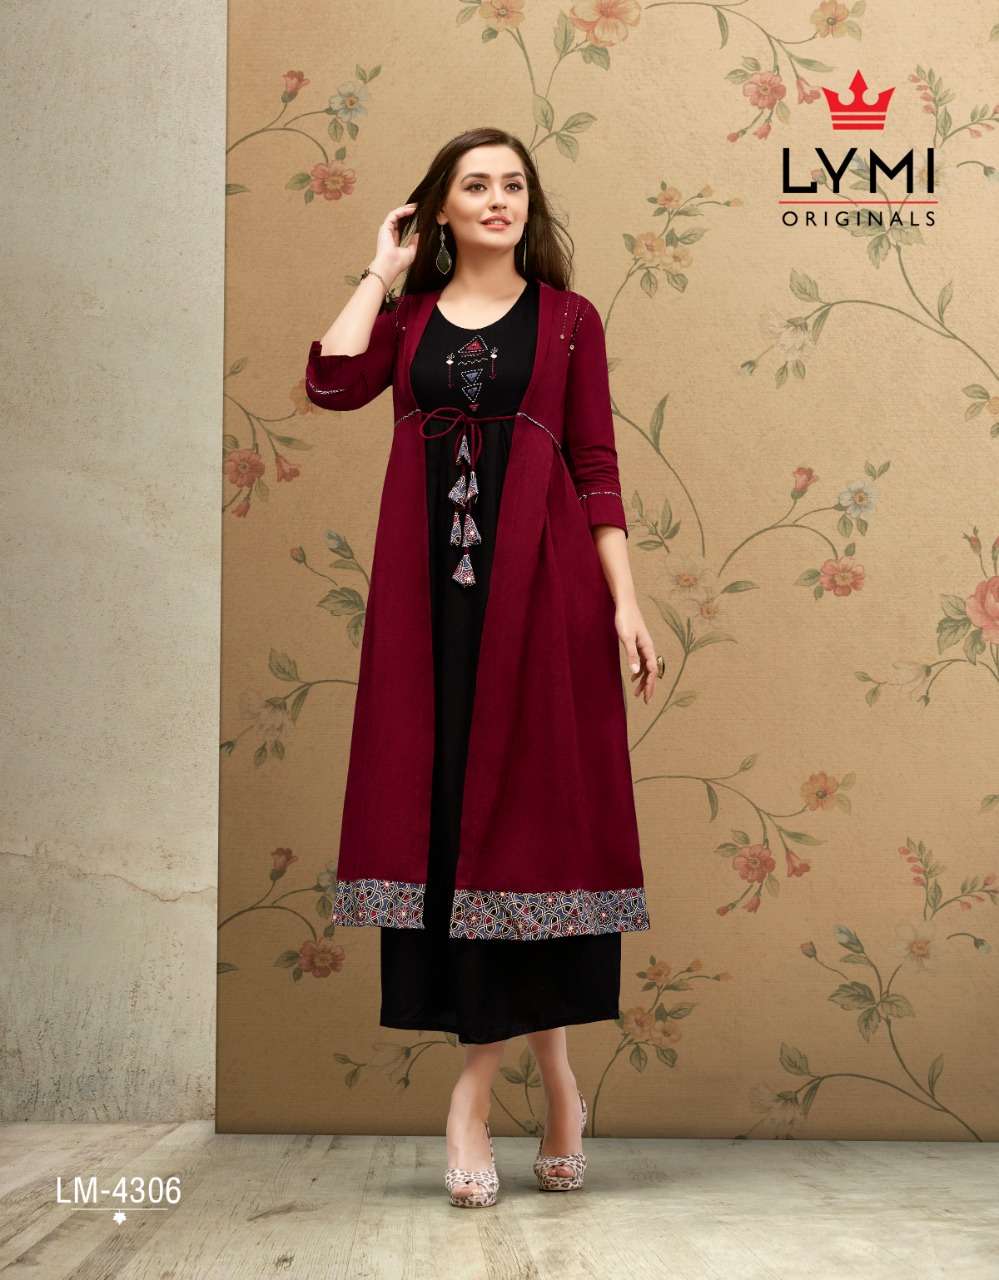 HALL MARK BY LYMI ORIGINAL 4301 TO 4308 SERIES STYLISH FANCY BEAUTIFUL COLORFUL CASUAL WEAR & ETHNIC WEAR HAND WORK RAYON KURTIS AT WHOLESALE PRICE